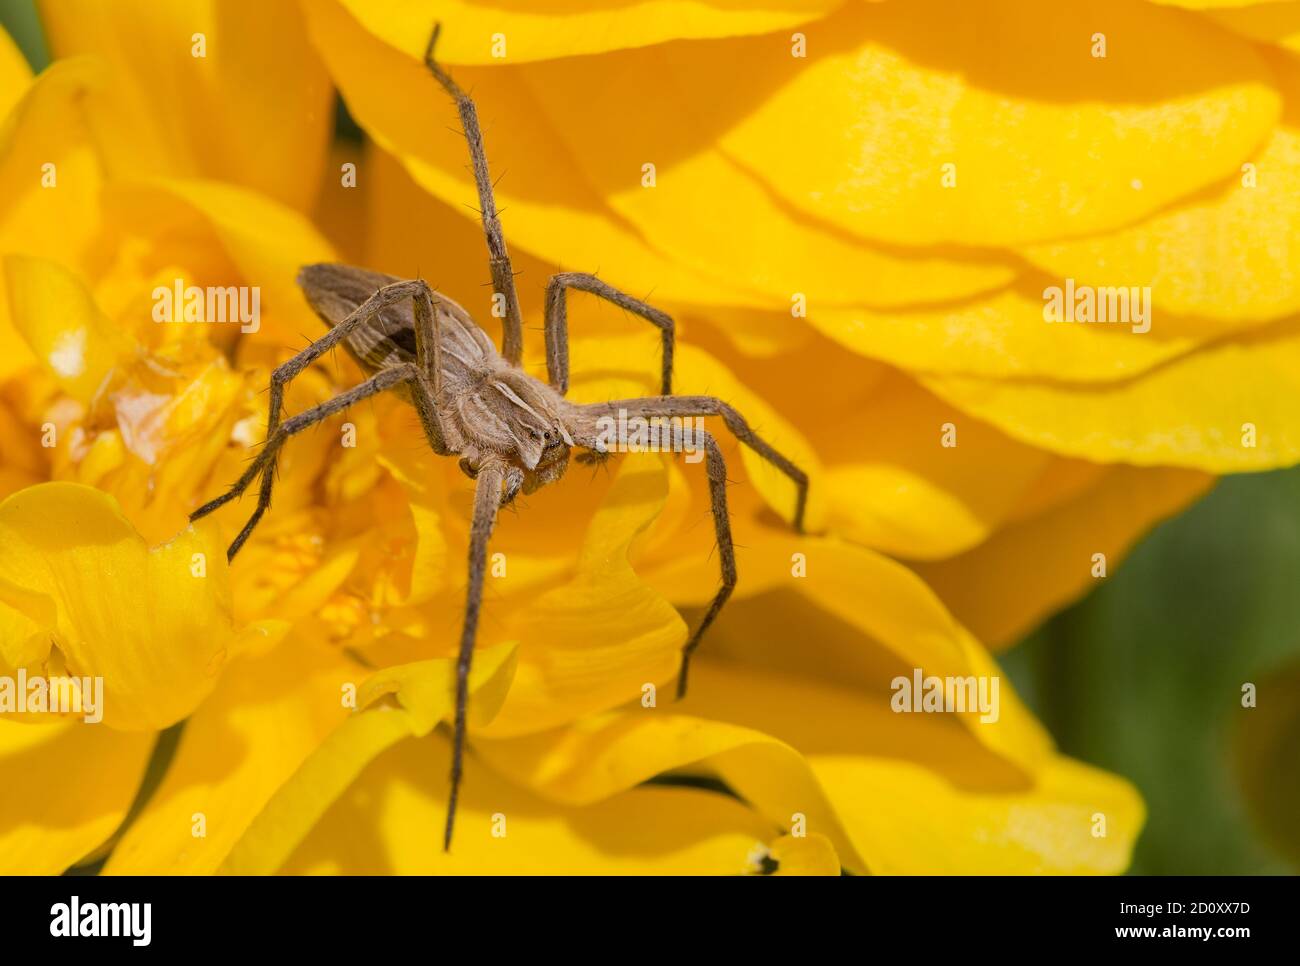 Spider on a yellow flower. Stock Photo